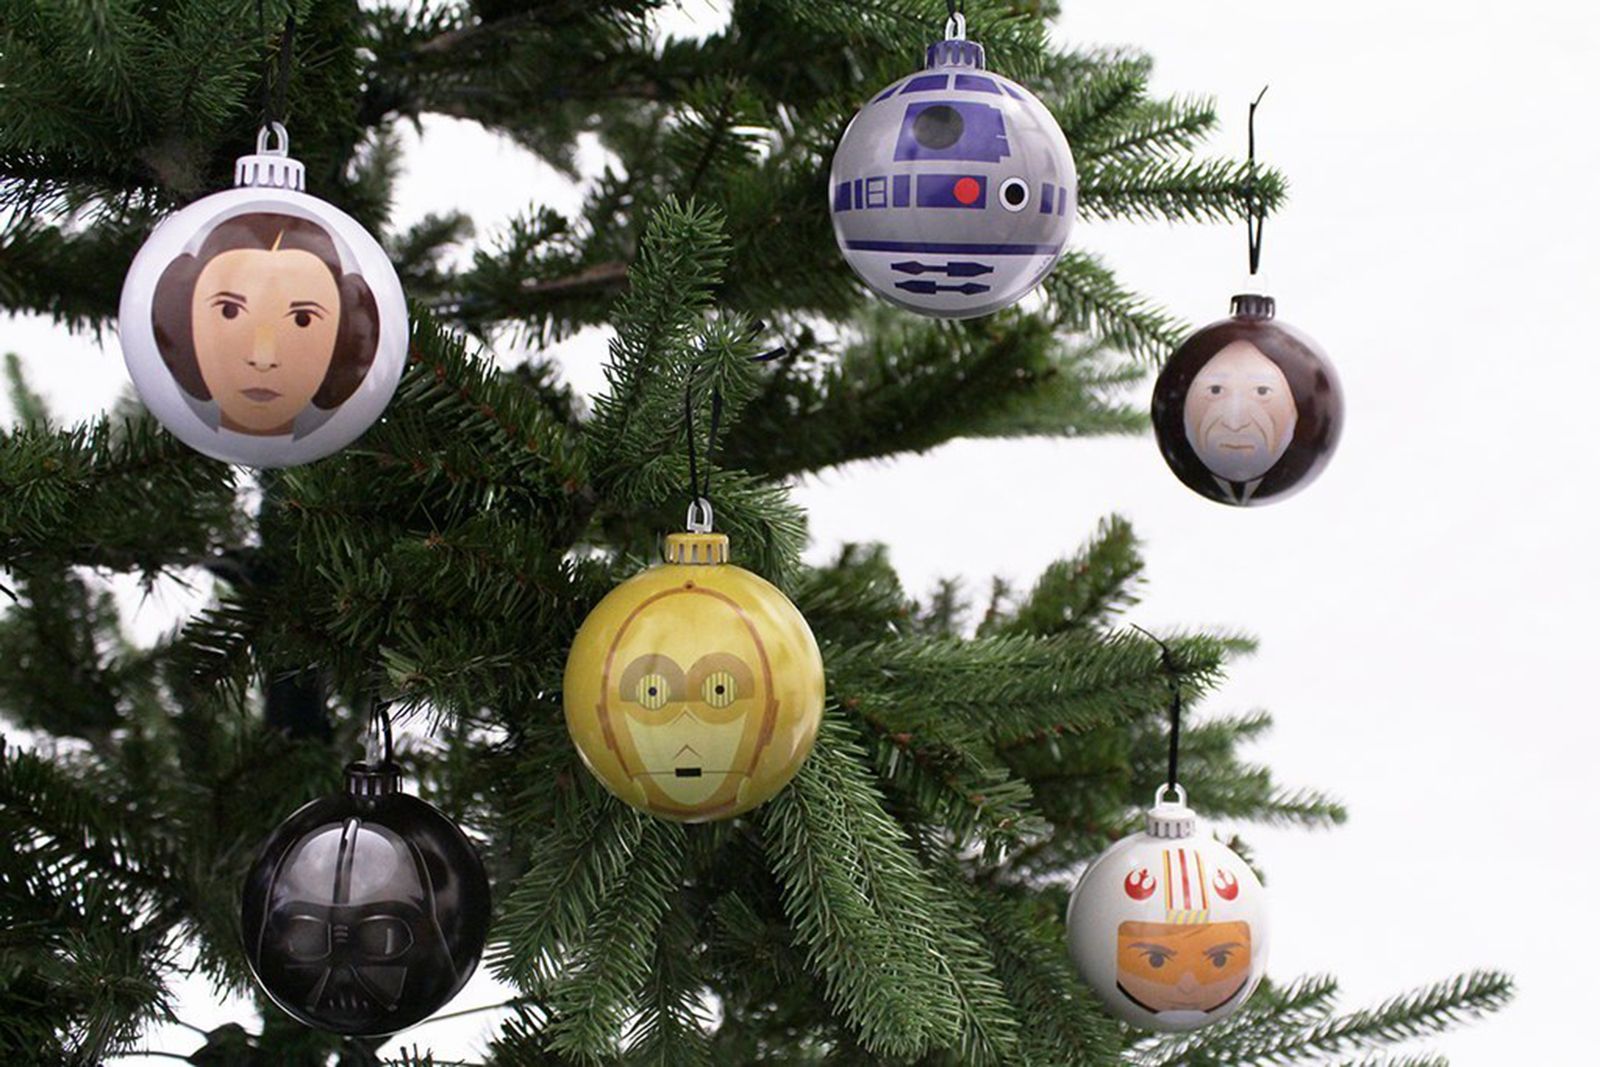 13 Best Christmas Decorations Every Geek Should Own image 27